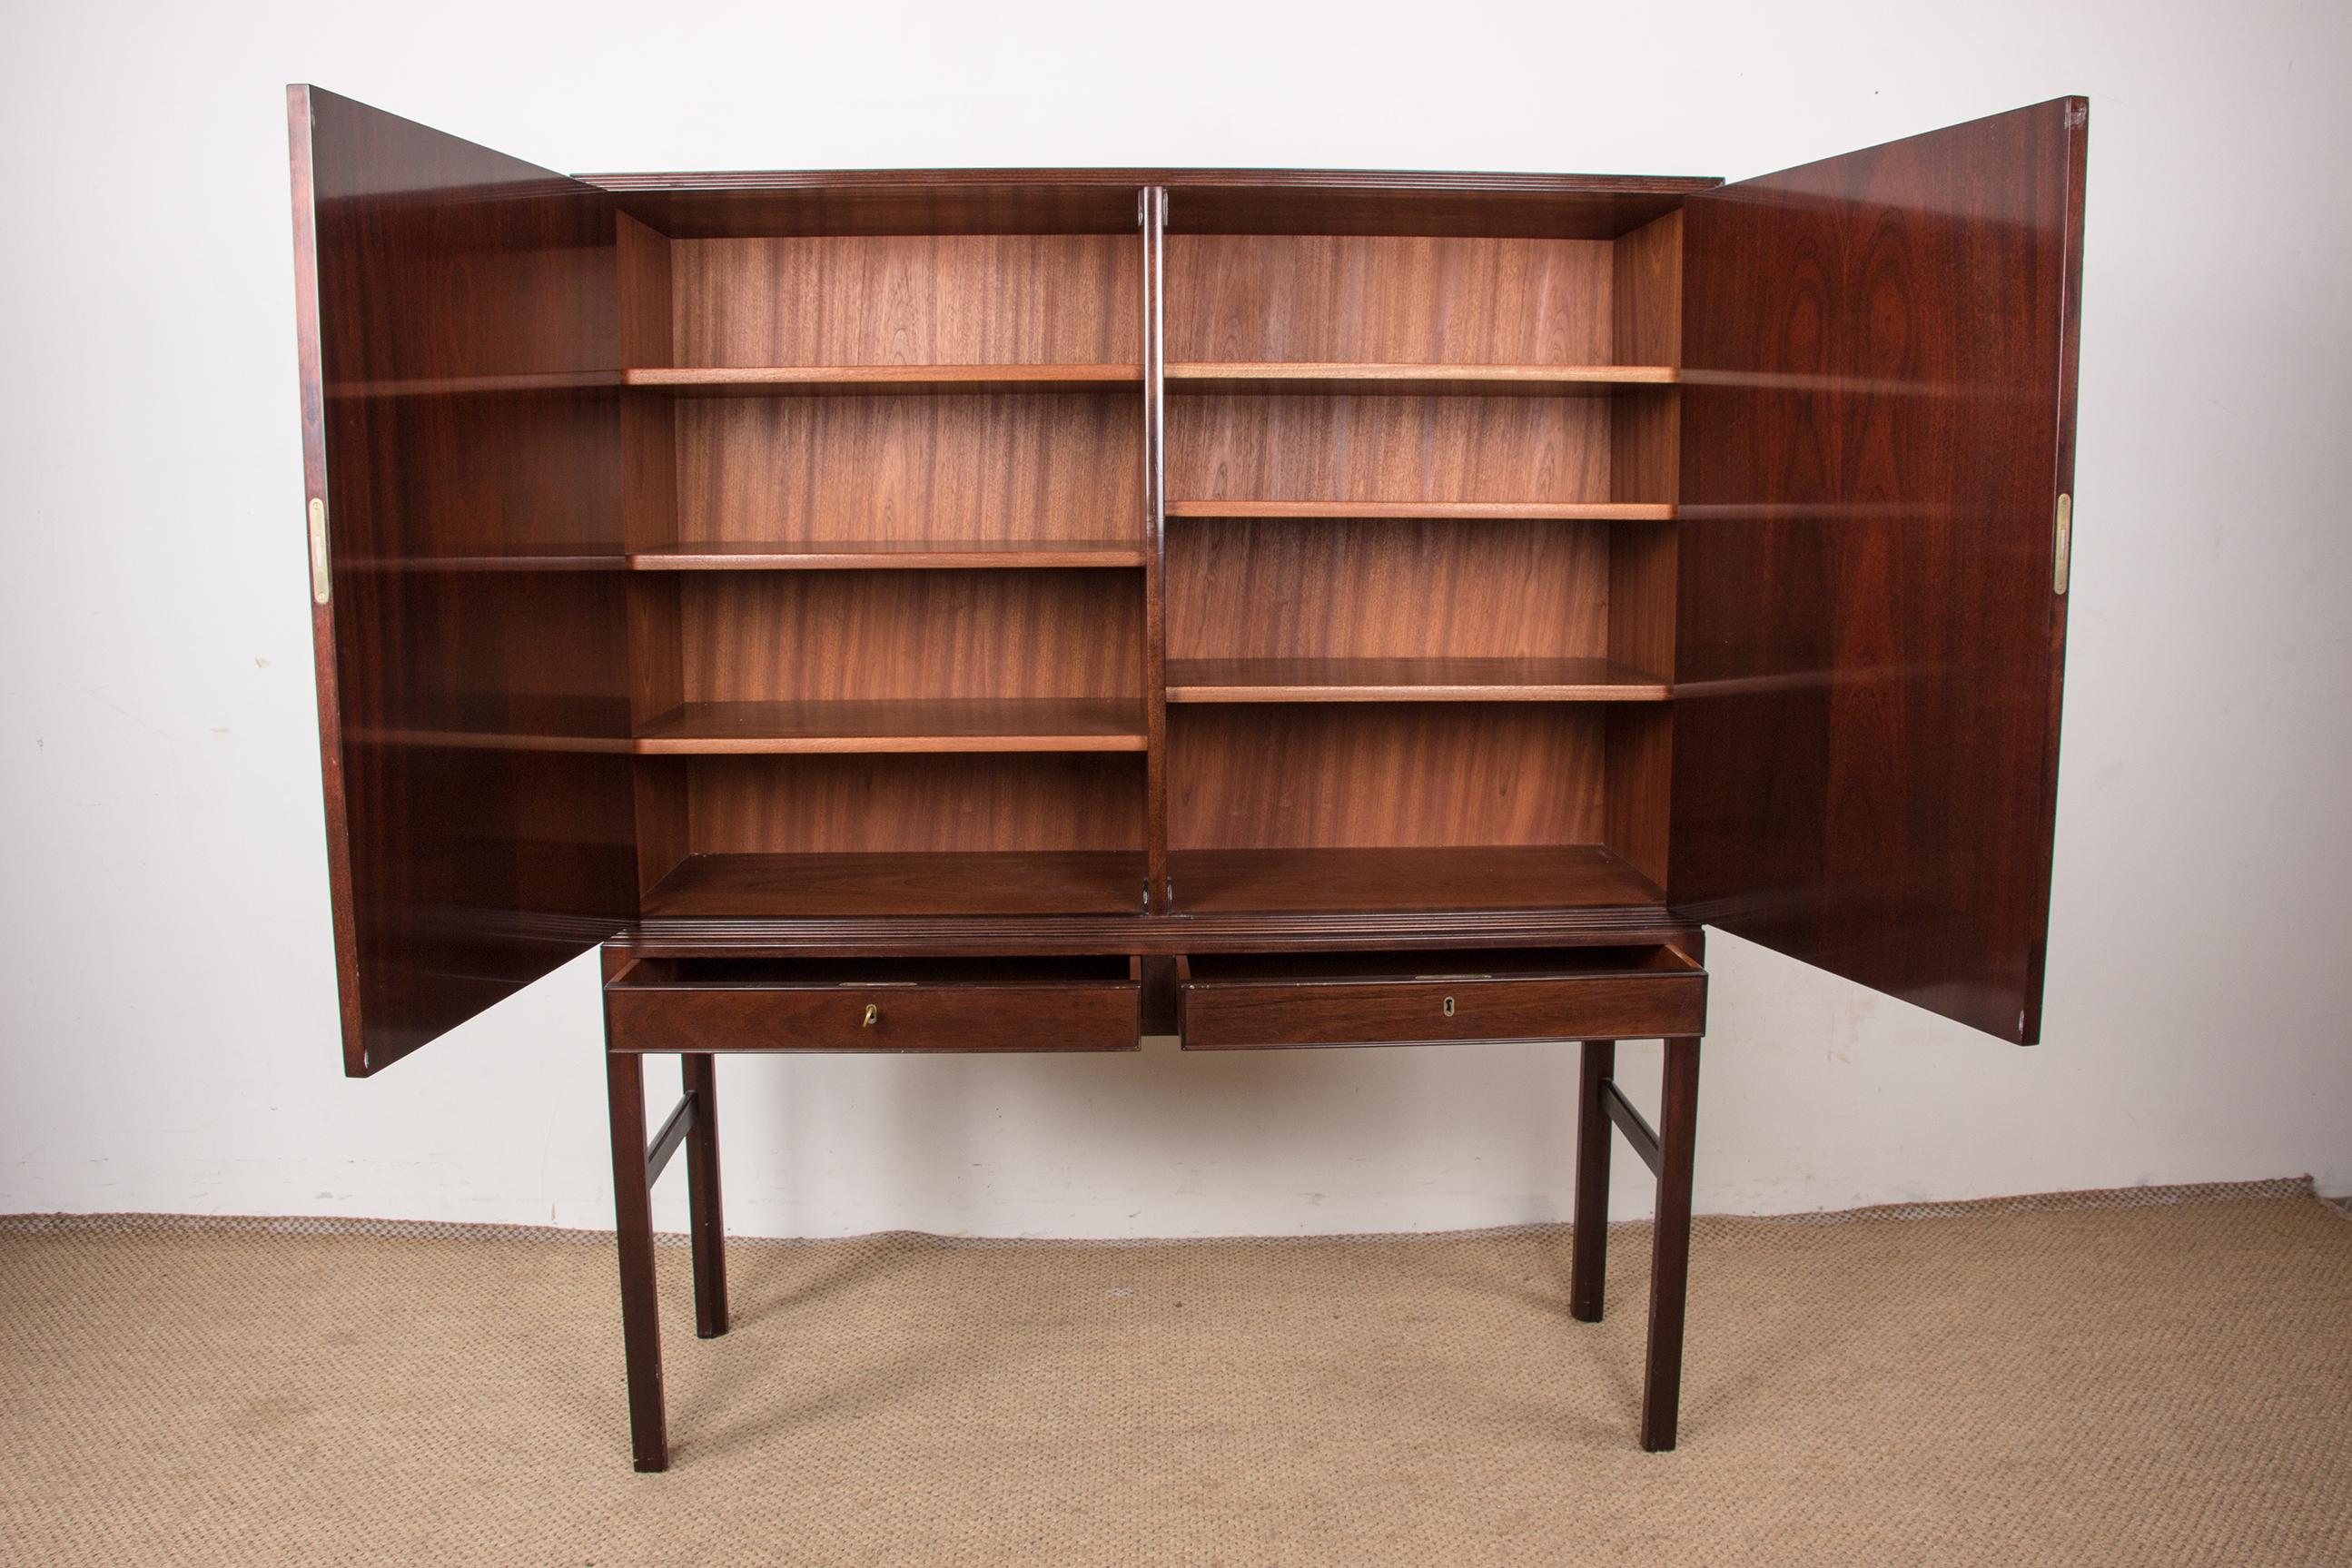 High Danish Cabinet in Mahogany and Brass by Ole Wanscher for Poul Jeppesen 1960 For Sale 3